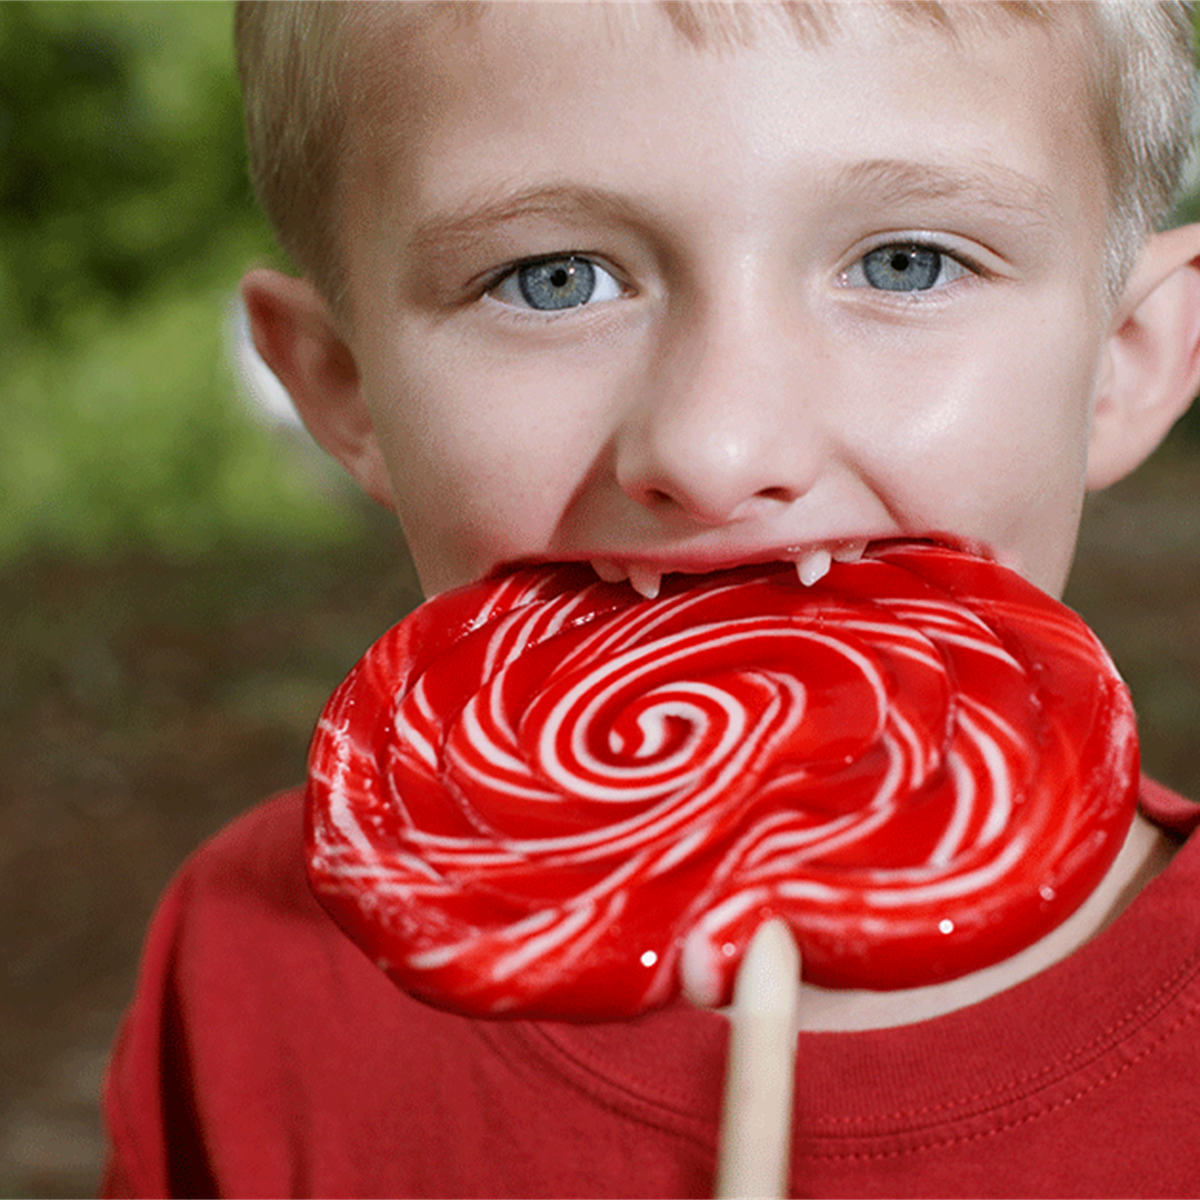 Top Safety Tips for Candy Making